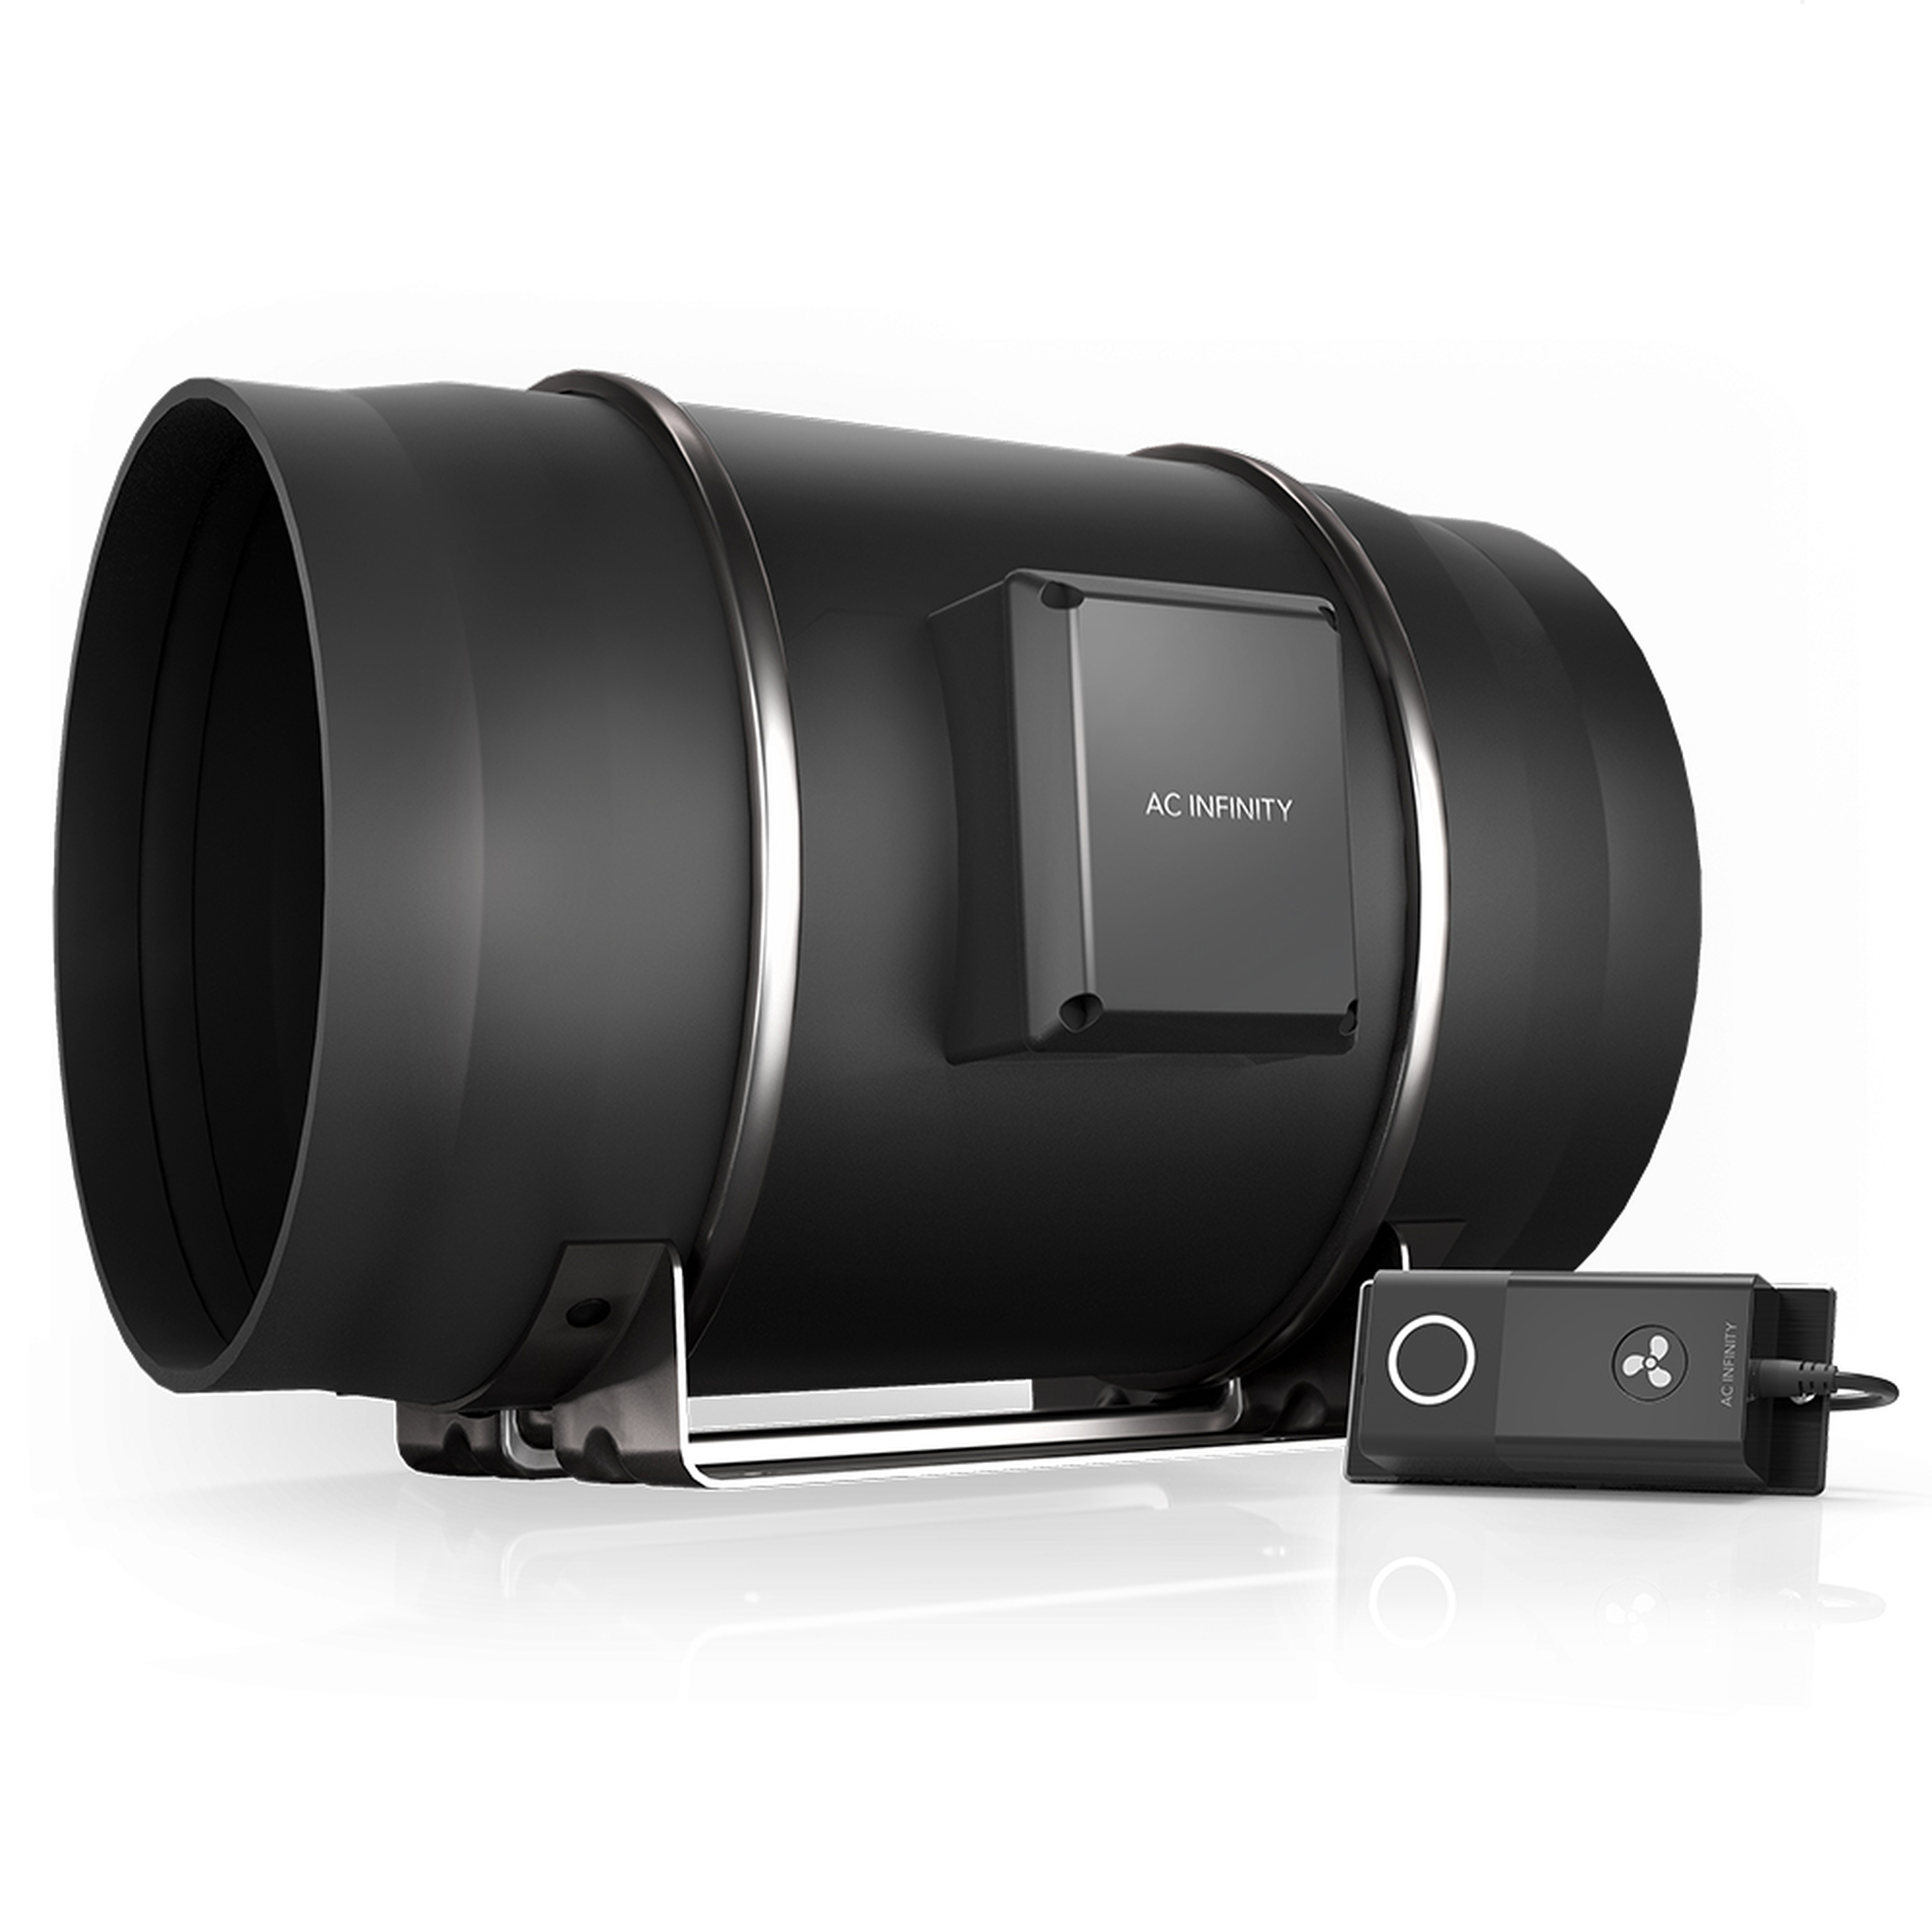 Cloudline S12 with inline control product image